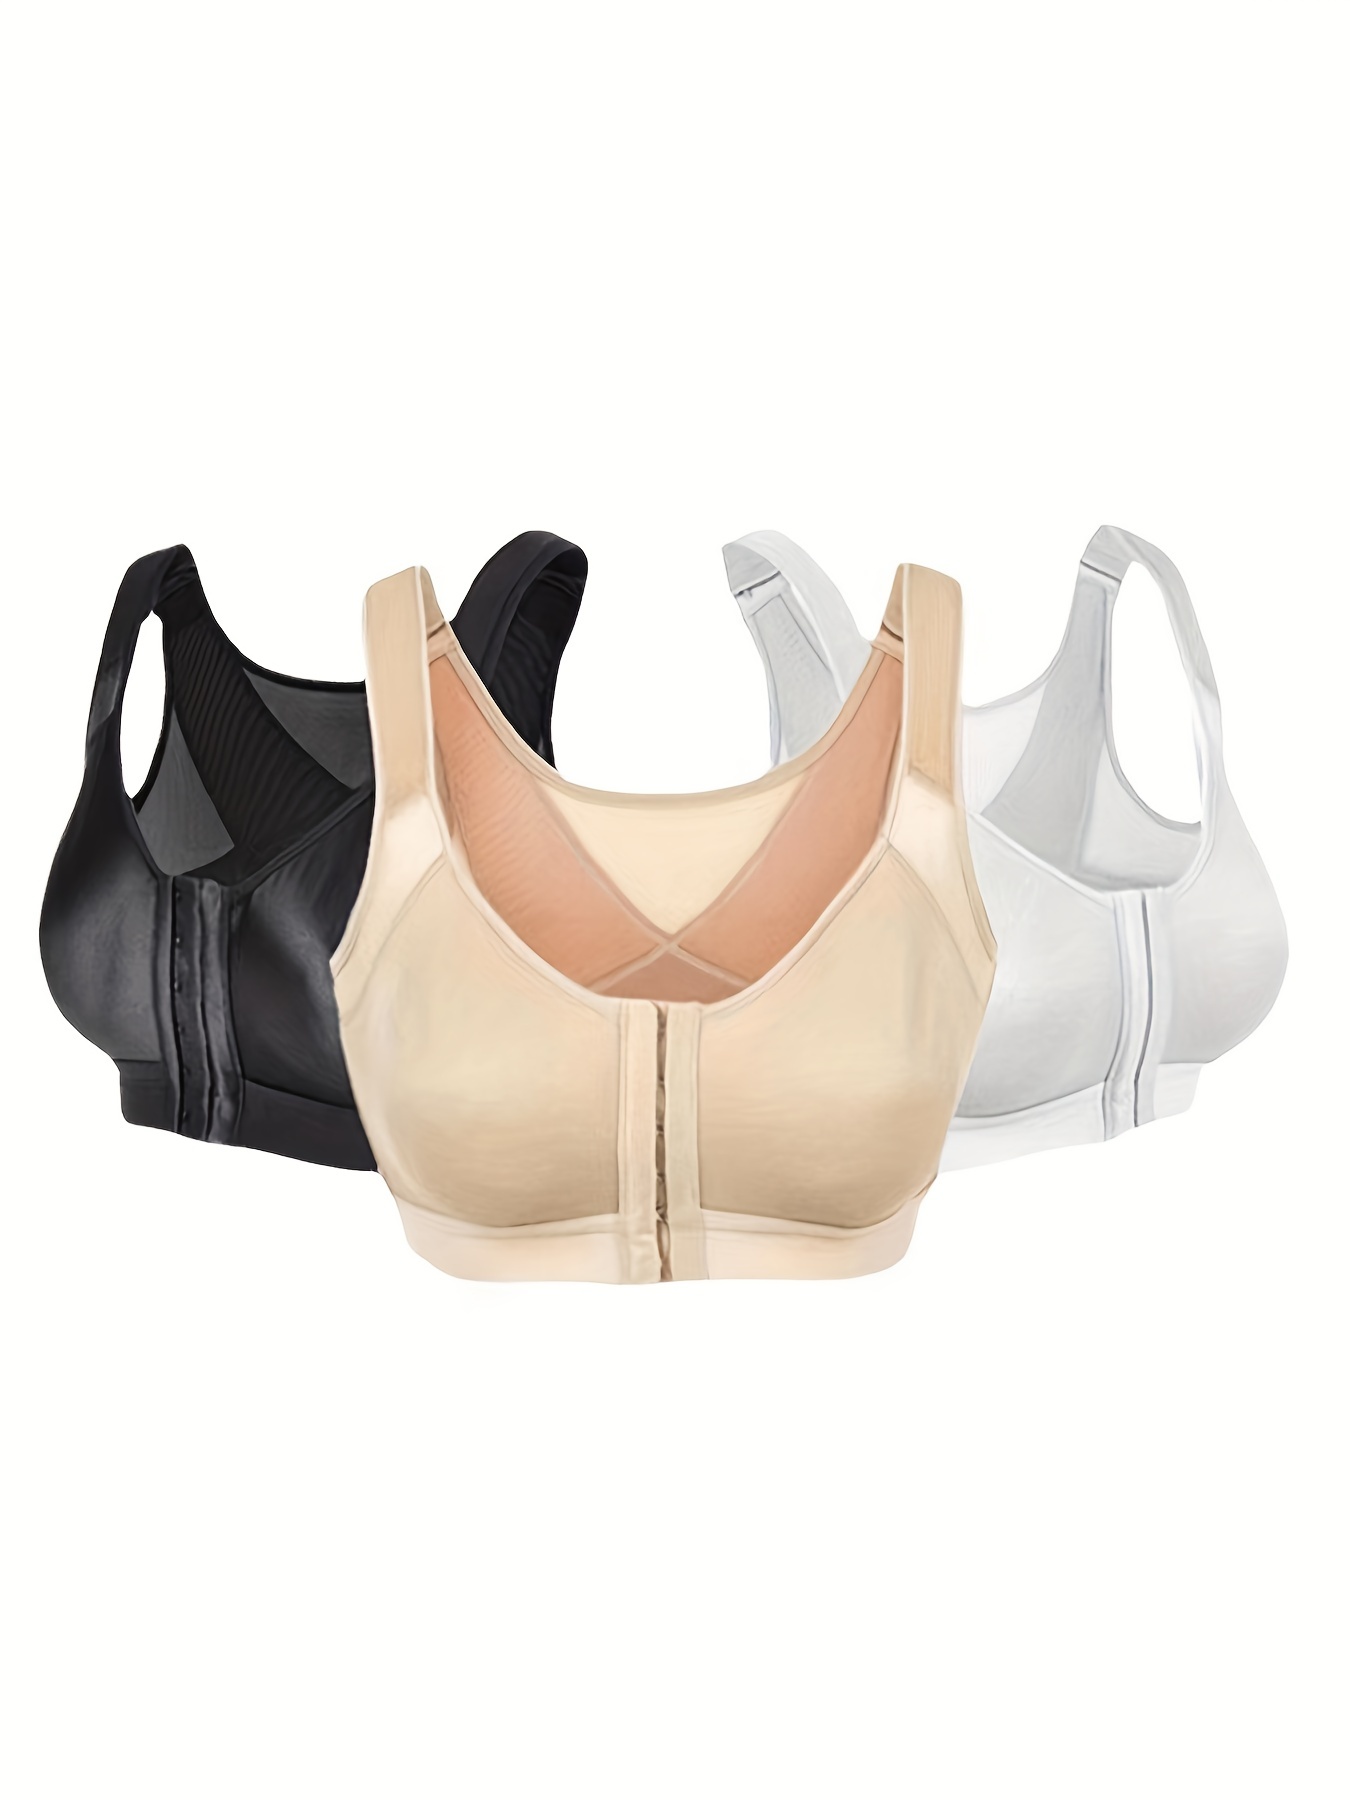 Pregnant Women's Nursing Bras, Lace Supportive Breastfeeding * Stretch  Comfy Maternity Bra For Daily Comfort Open Front Button